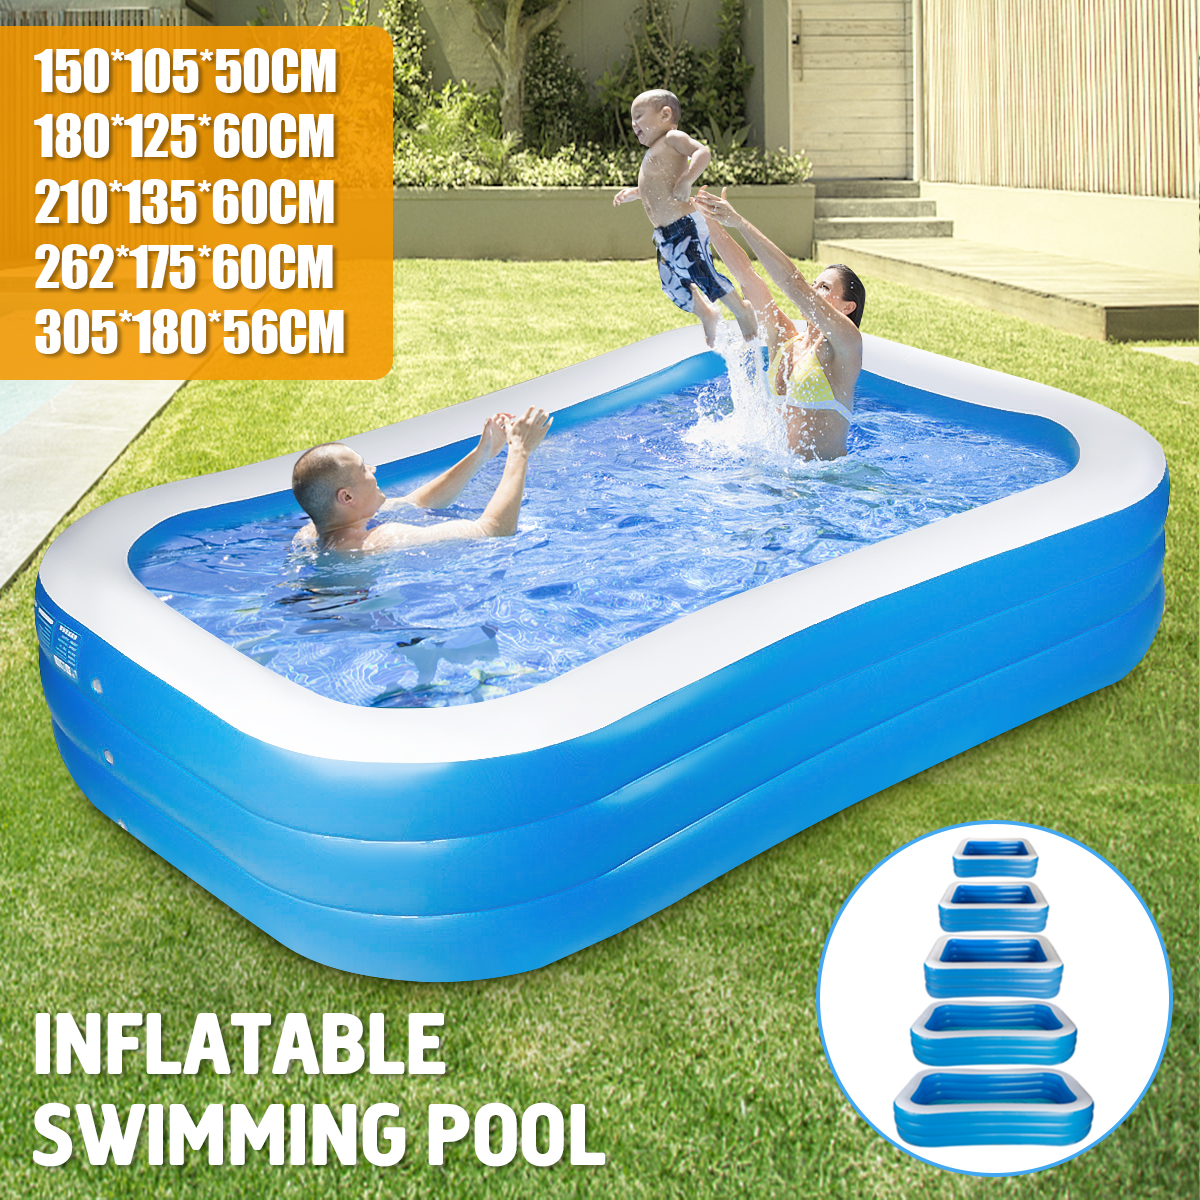 PVC-Thickened-Childrens-Inflatable-Swimming-Pool-Childrens-Pool-Capacity-Large-Bath-Tub-Outdoor-Indo-1842748-1